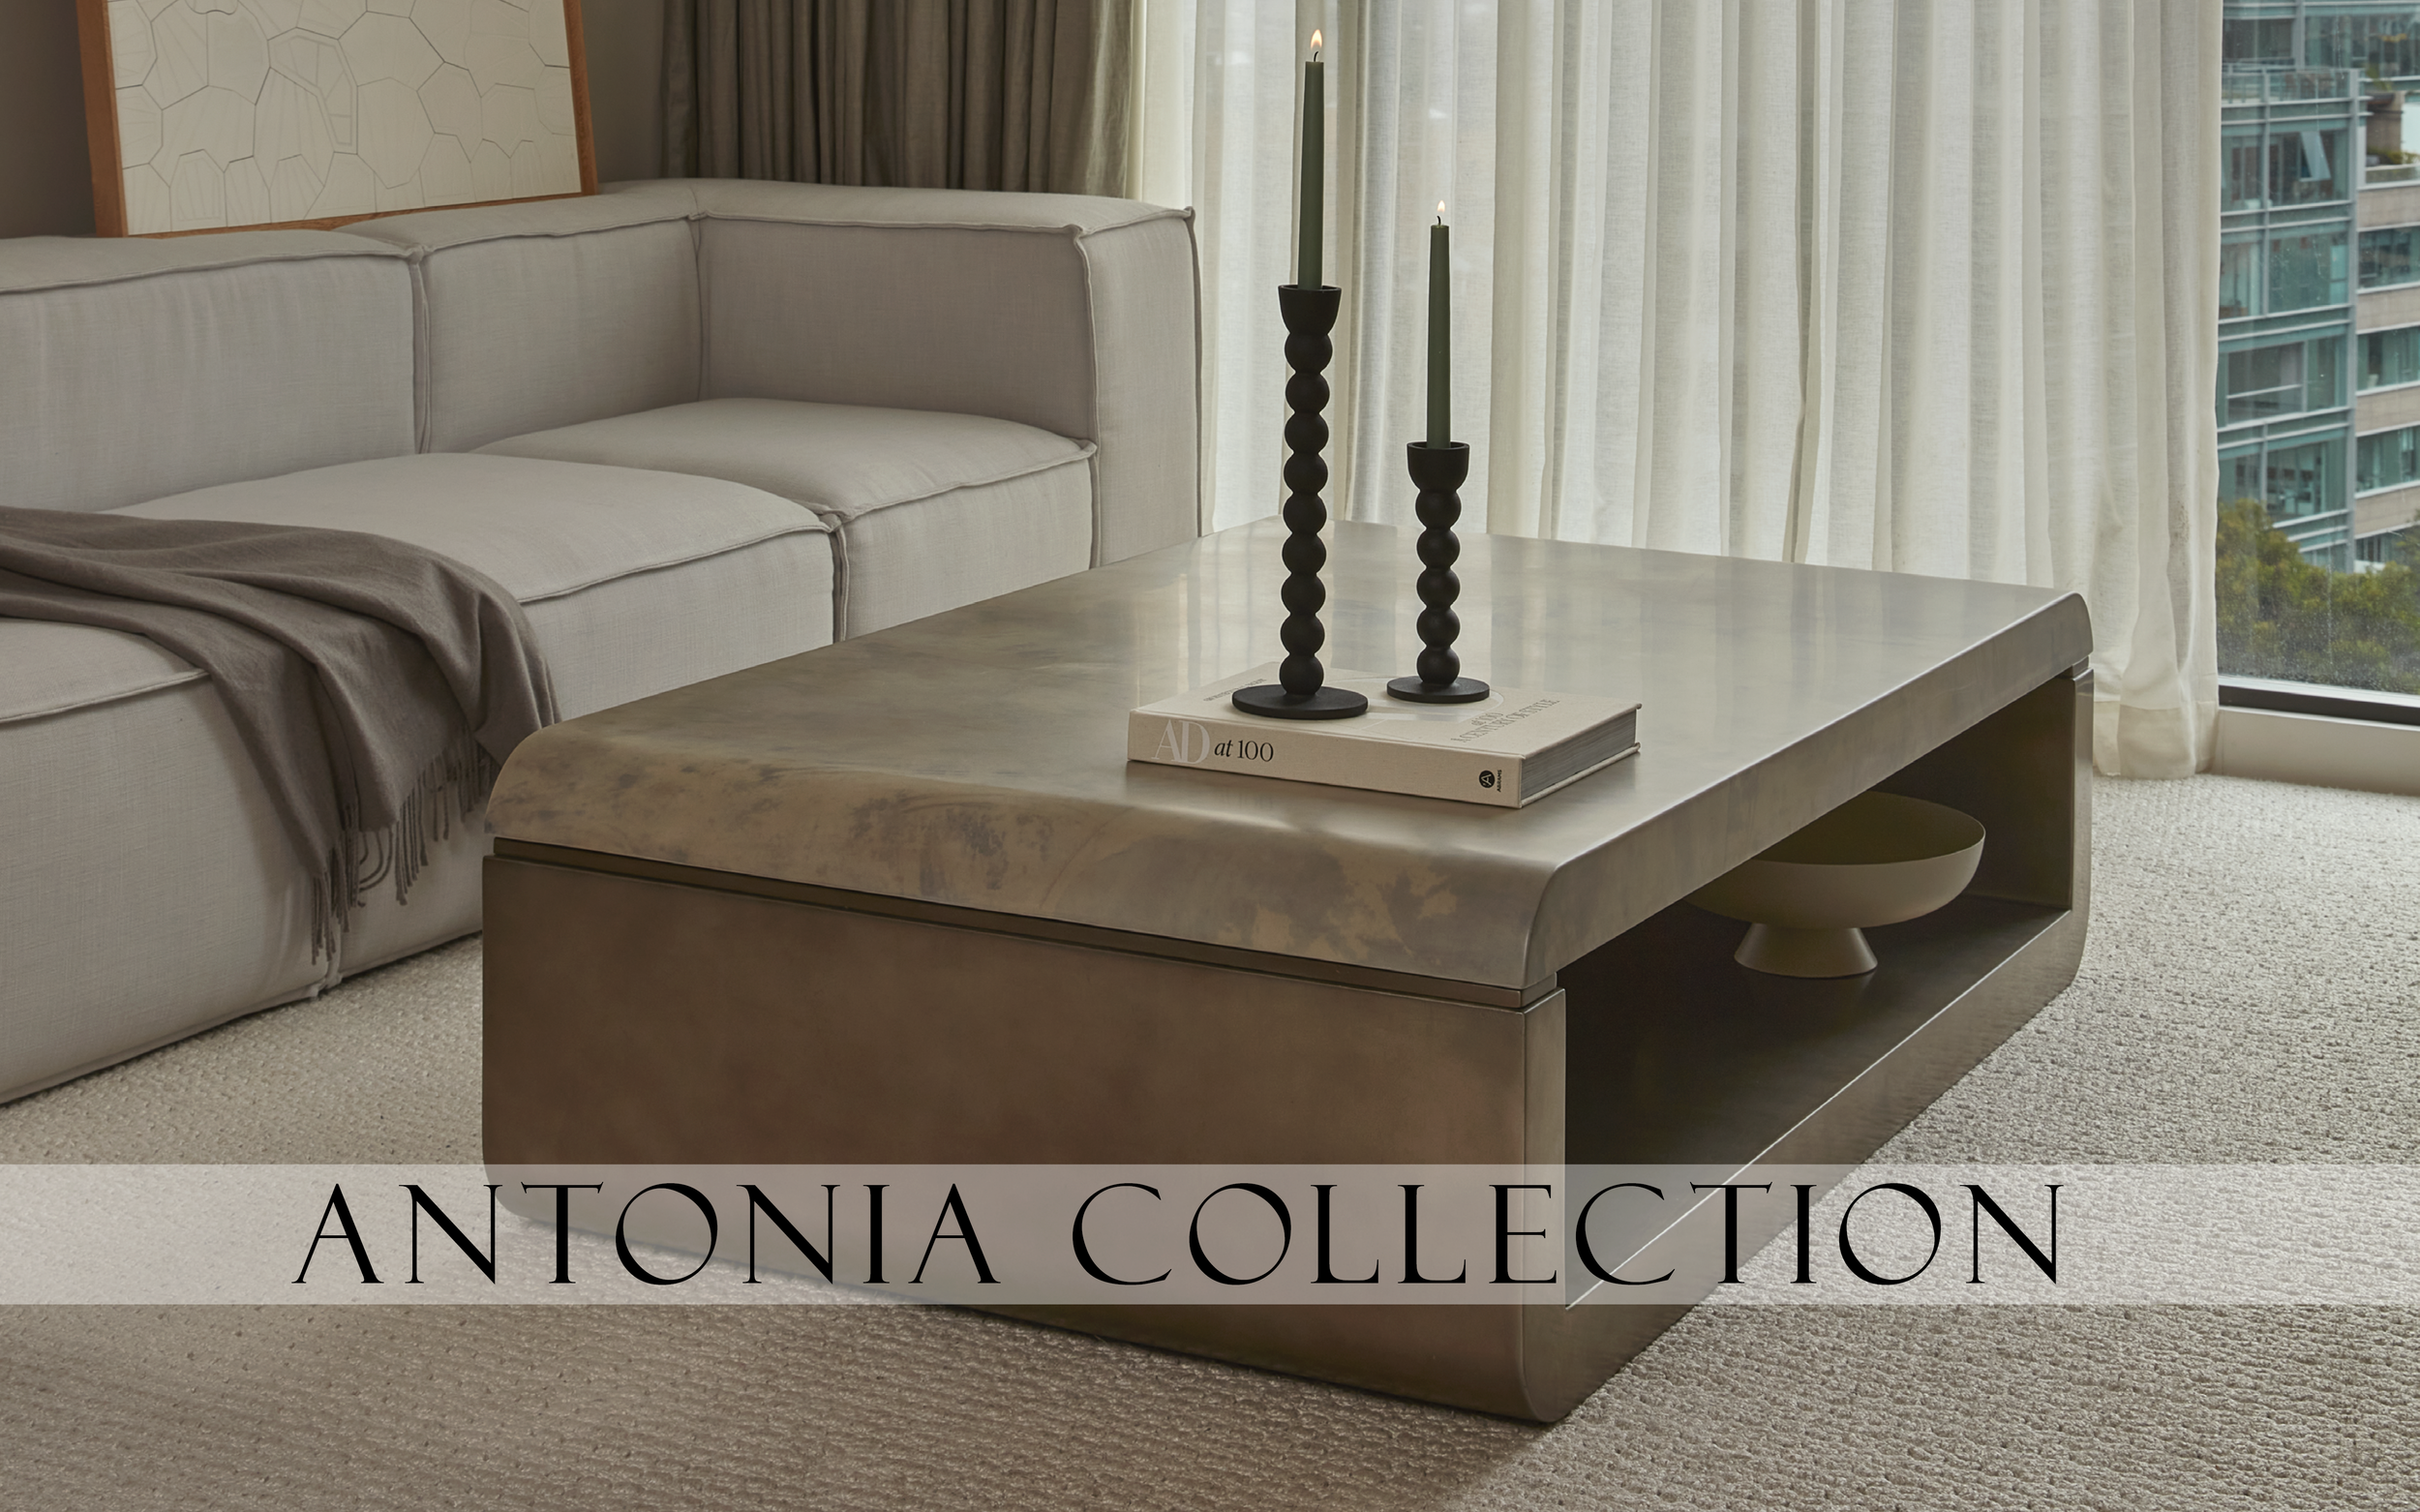 02 ANTONIA COLLECTION BANNER.png